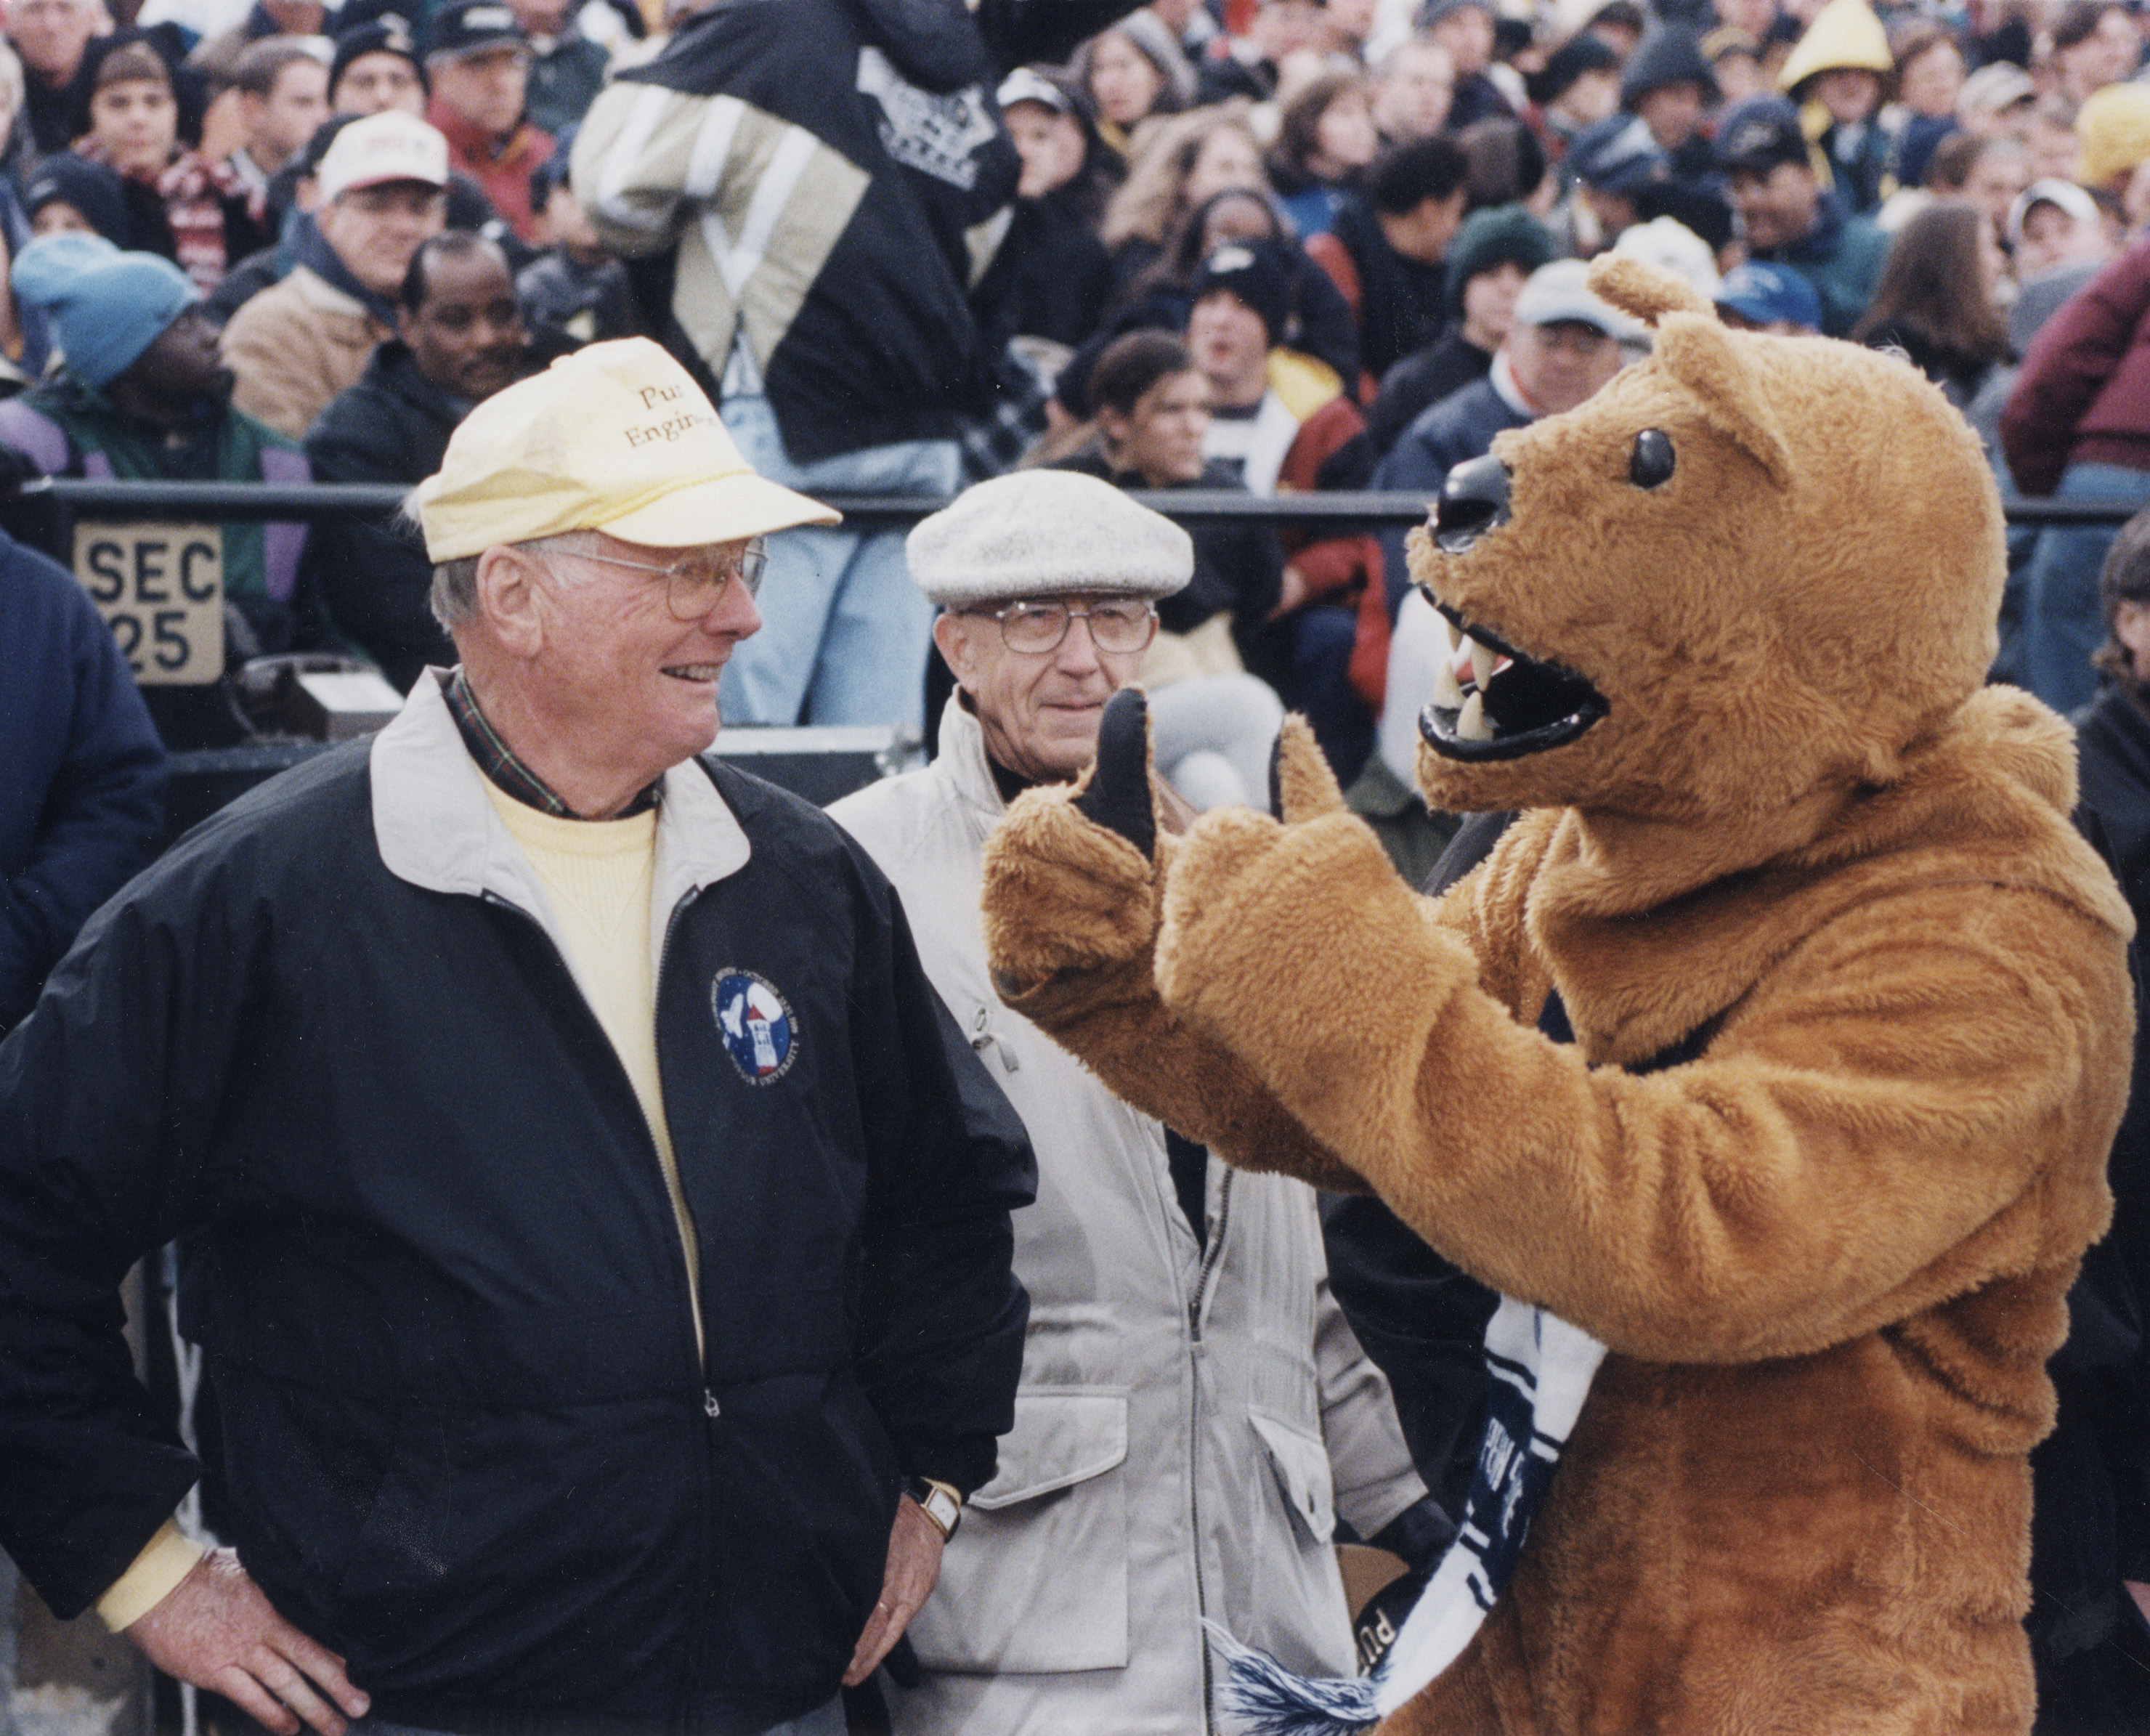 the Nittany Lion talking to fans on the sideline at a football game